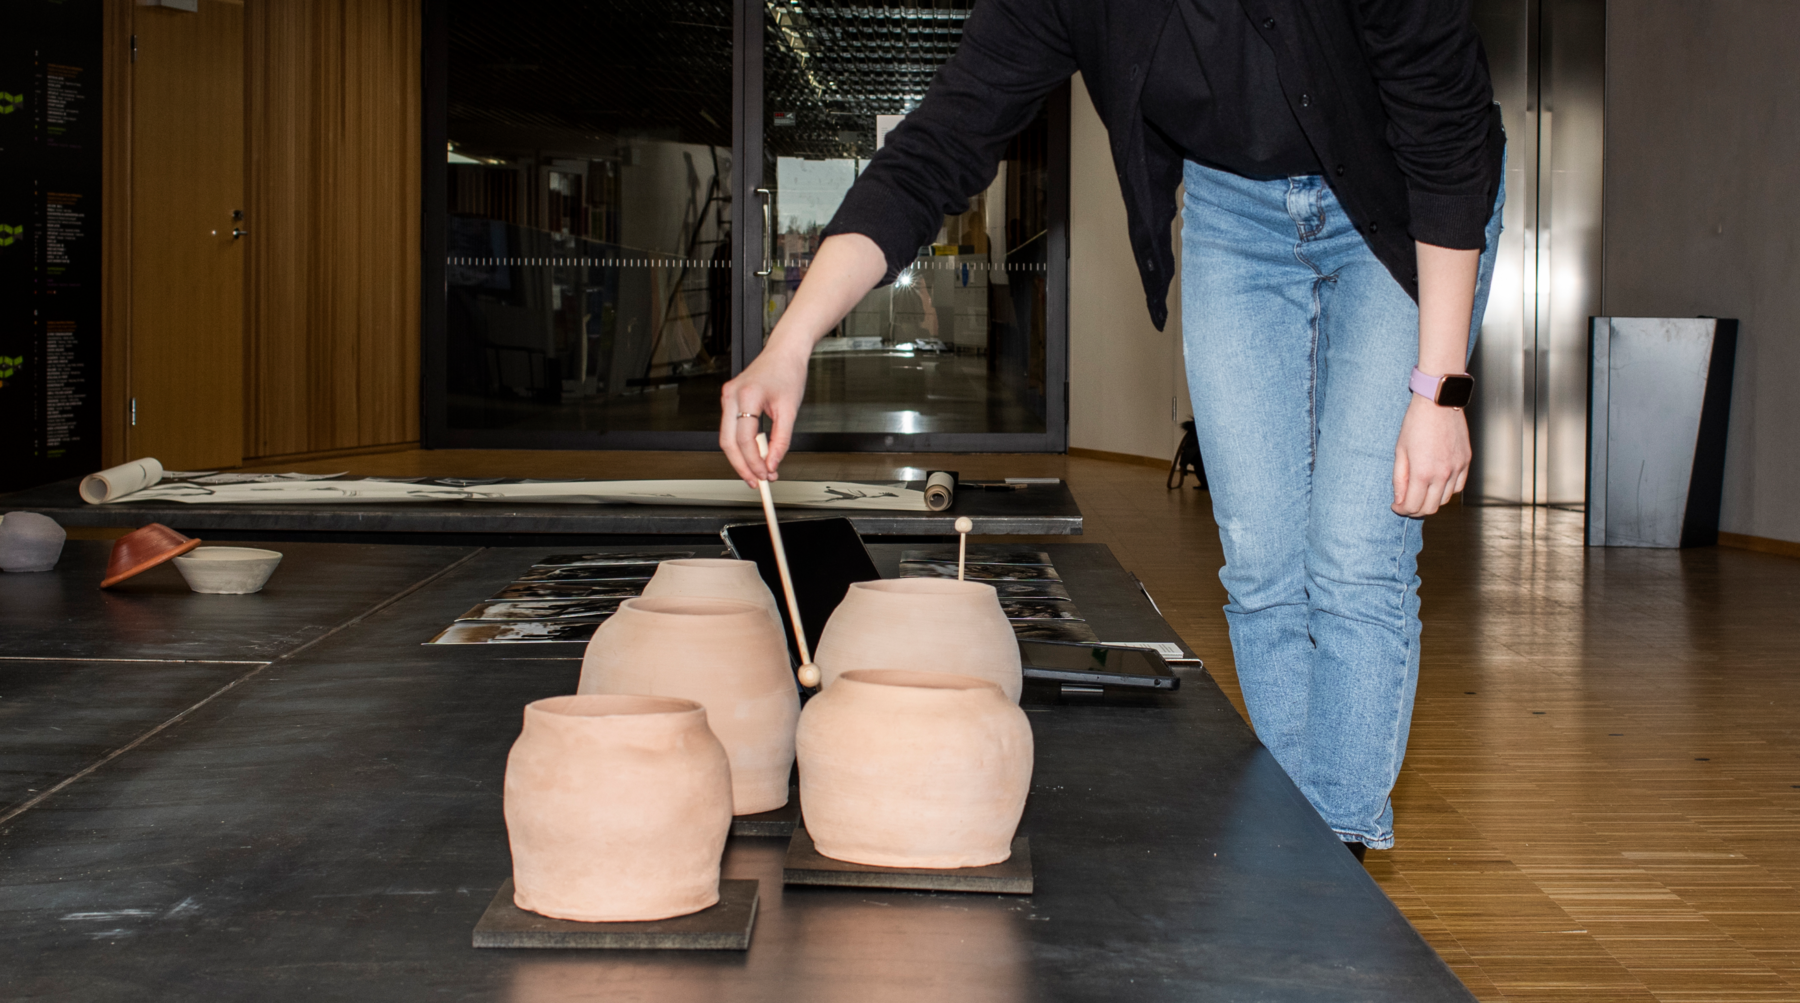 a person standing next to five pots in an exhibition space